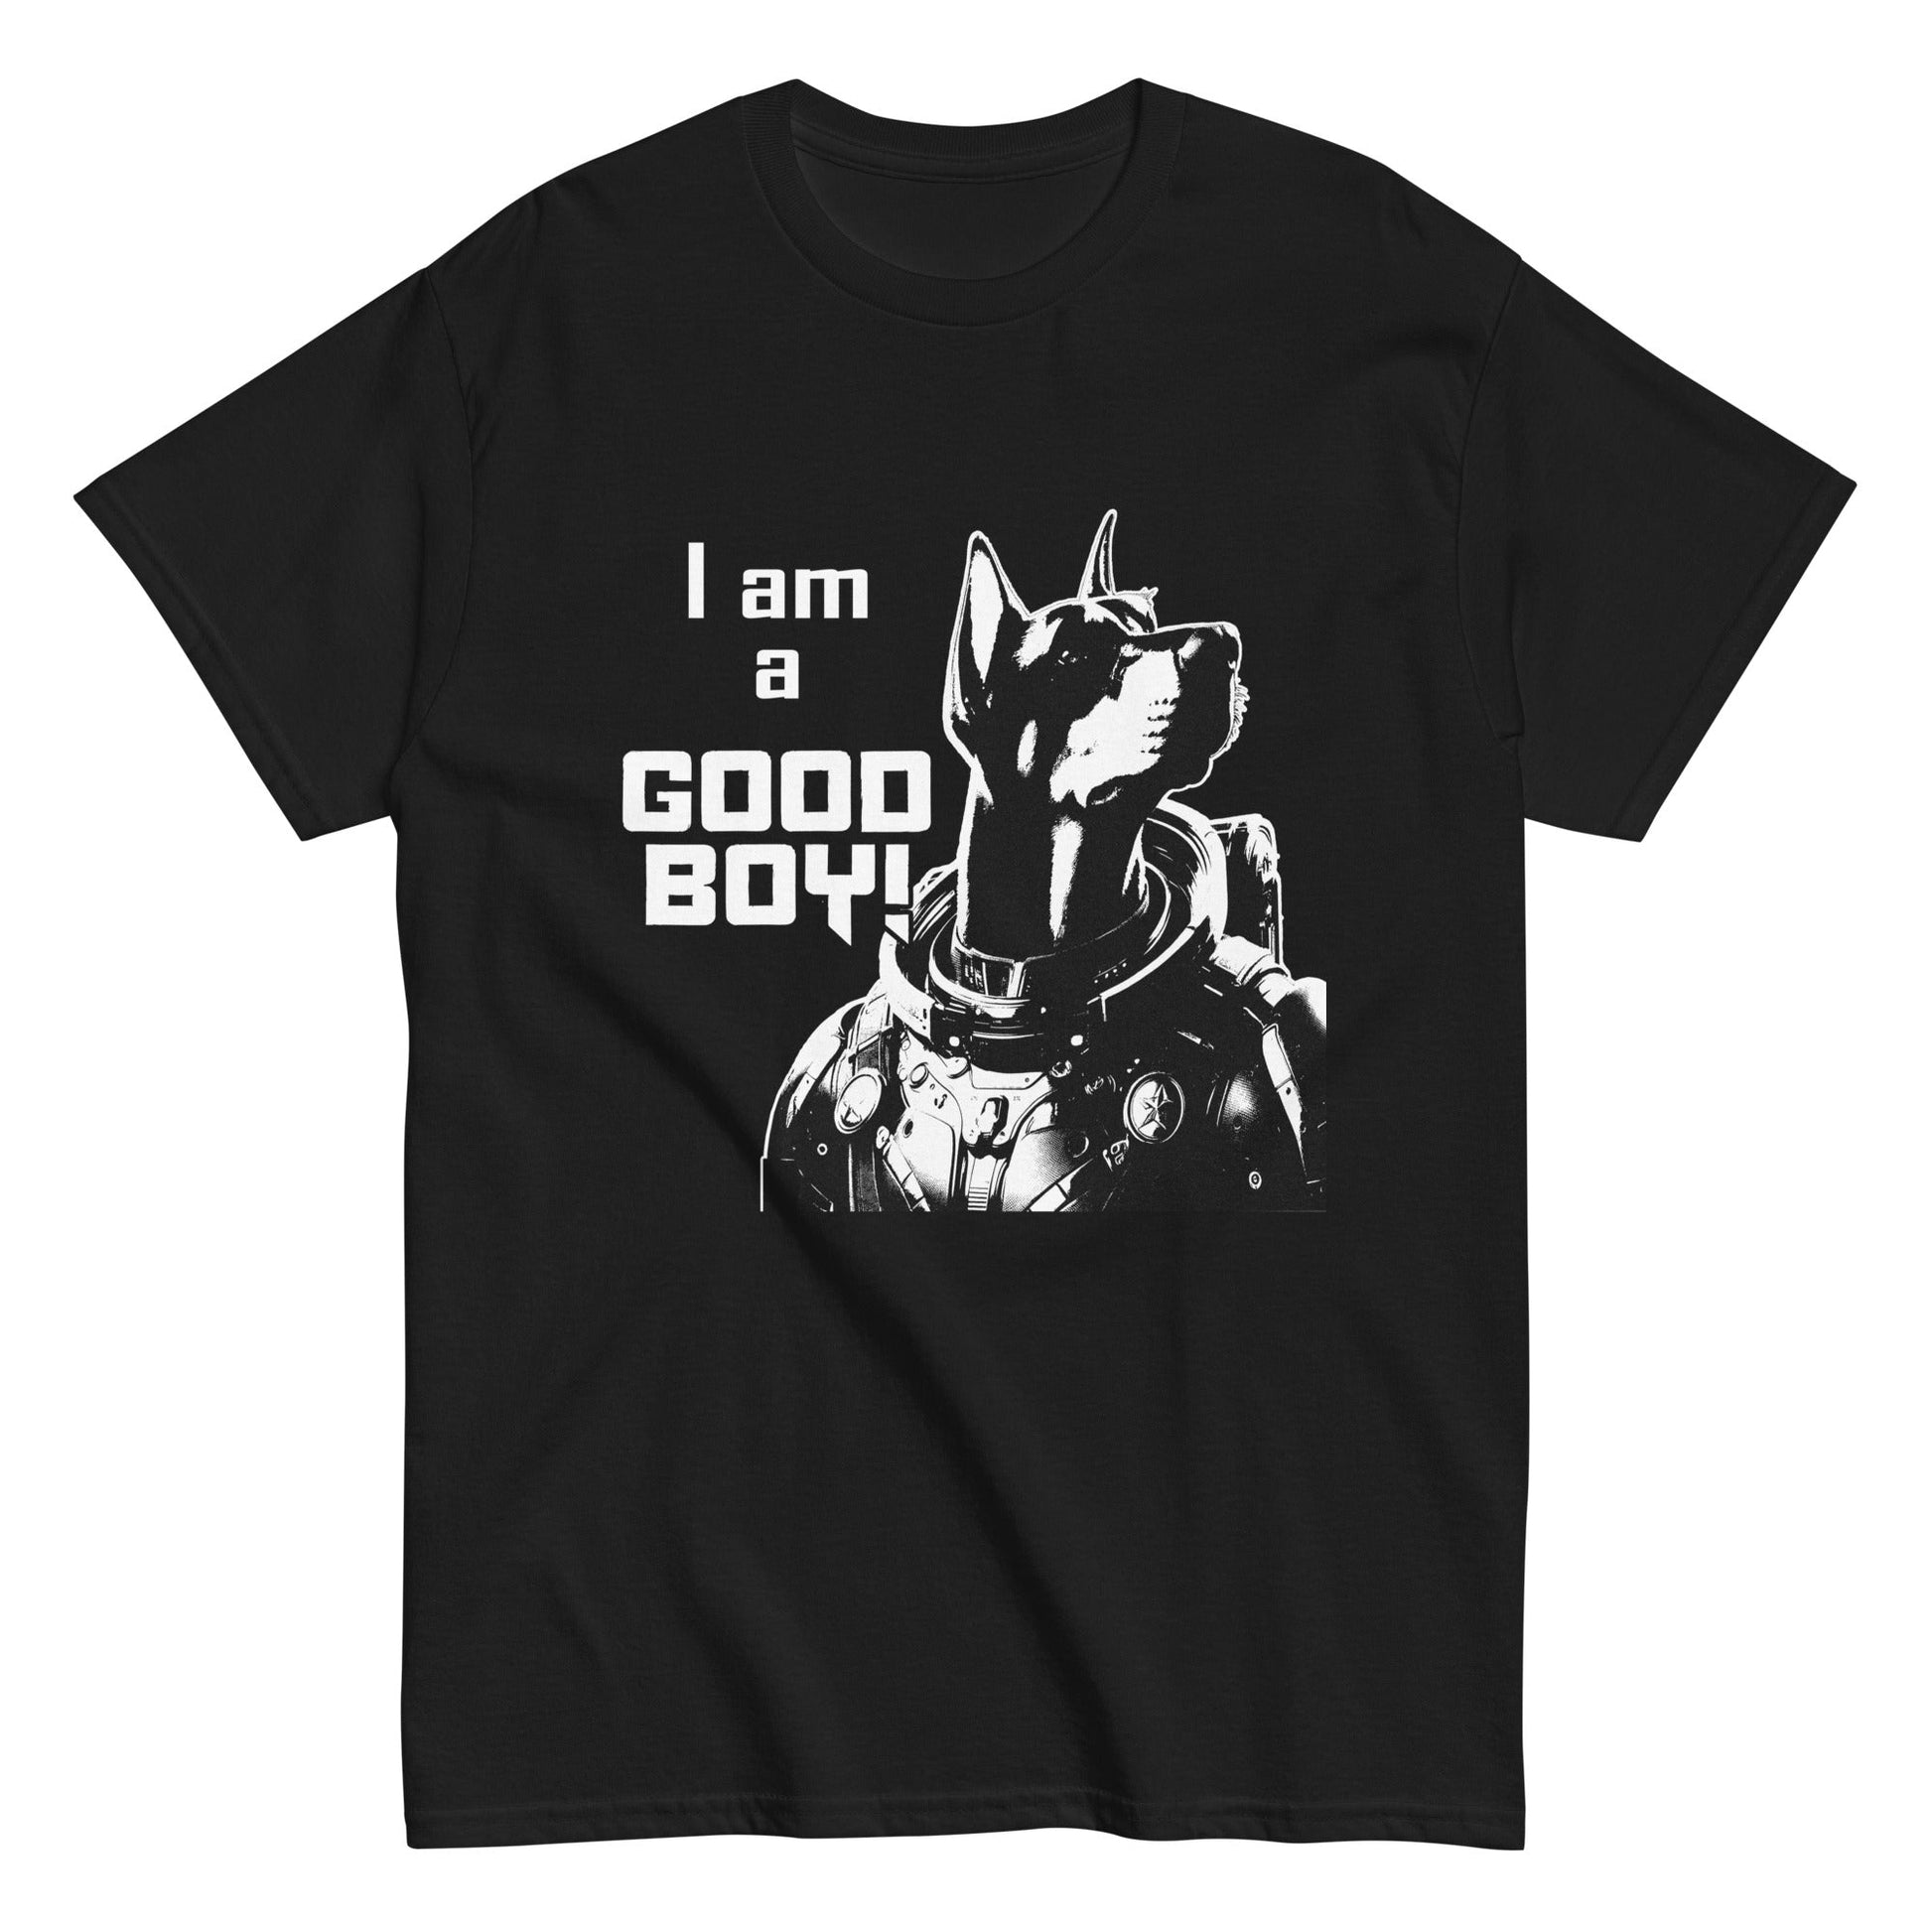 I Am a Good Boy Men's Classic Tee (Dark) - Join General Major in Saving the Galaxy! - Spectral Ink Shop - T-Shirt -6133535_11546